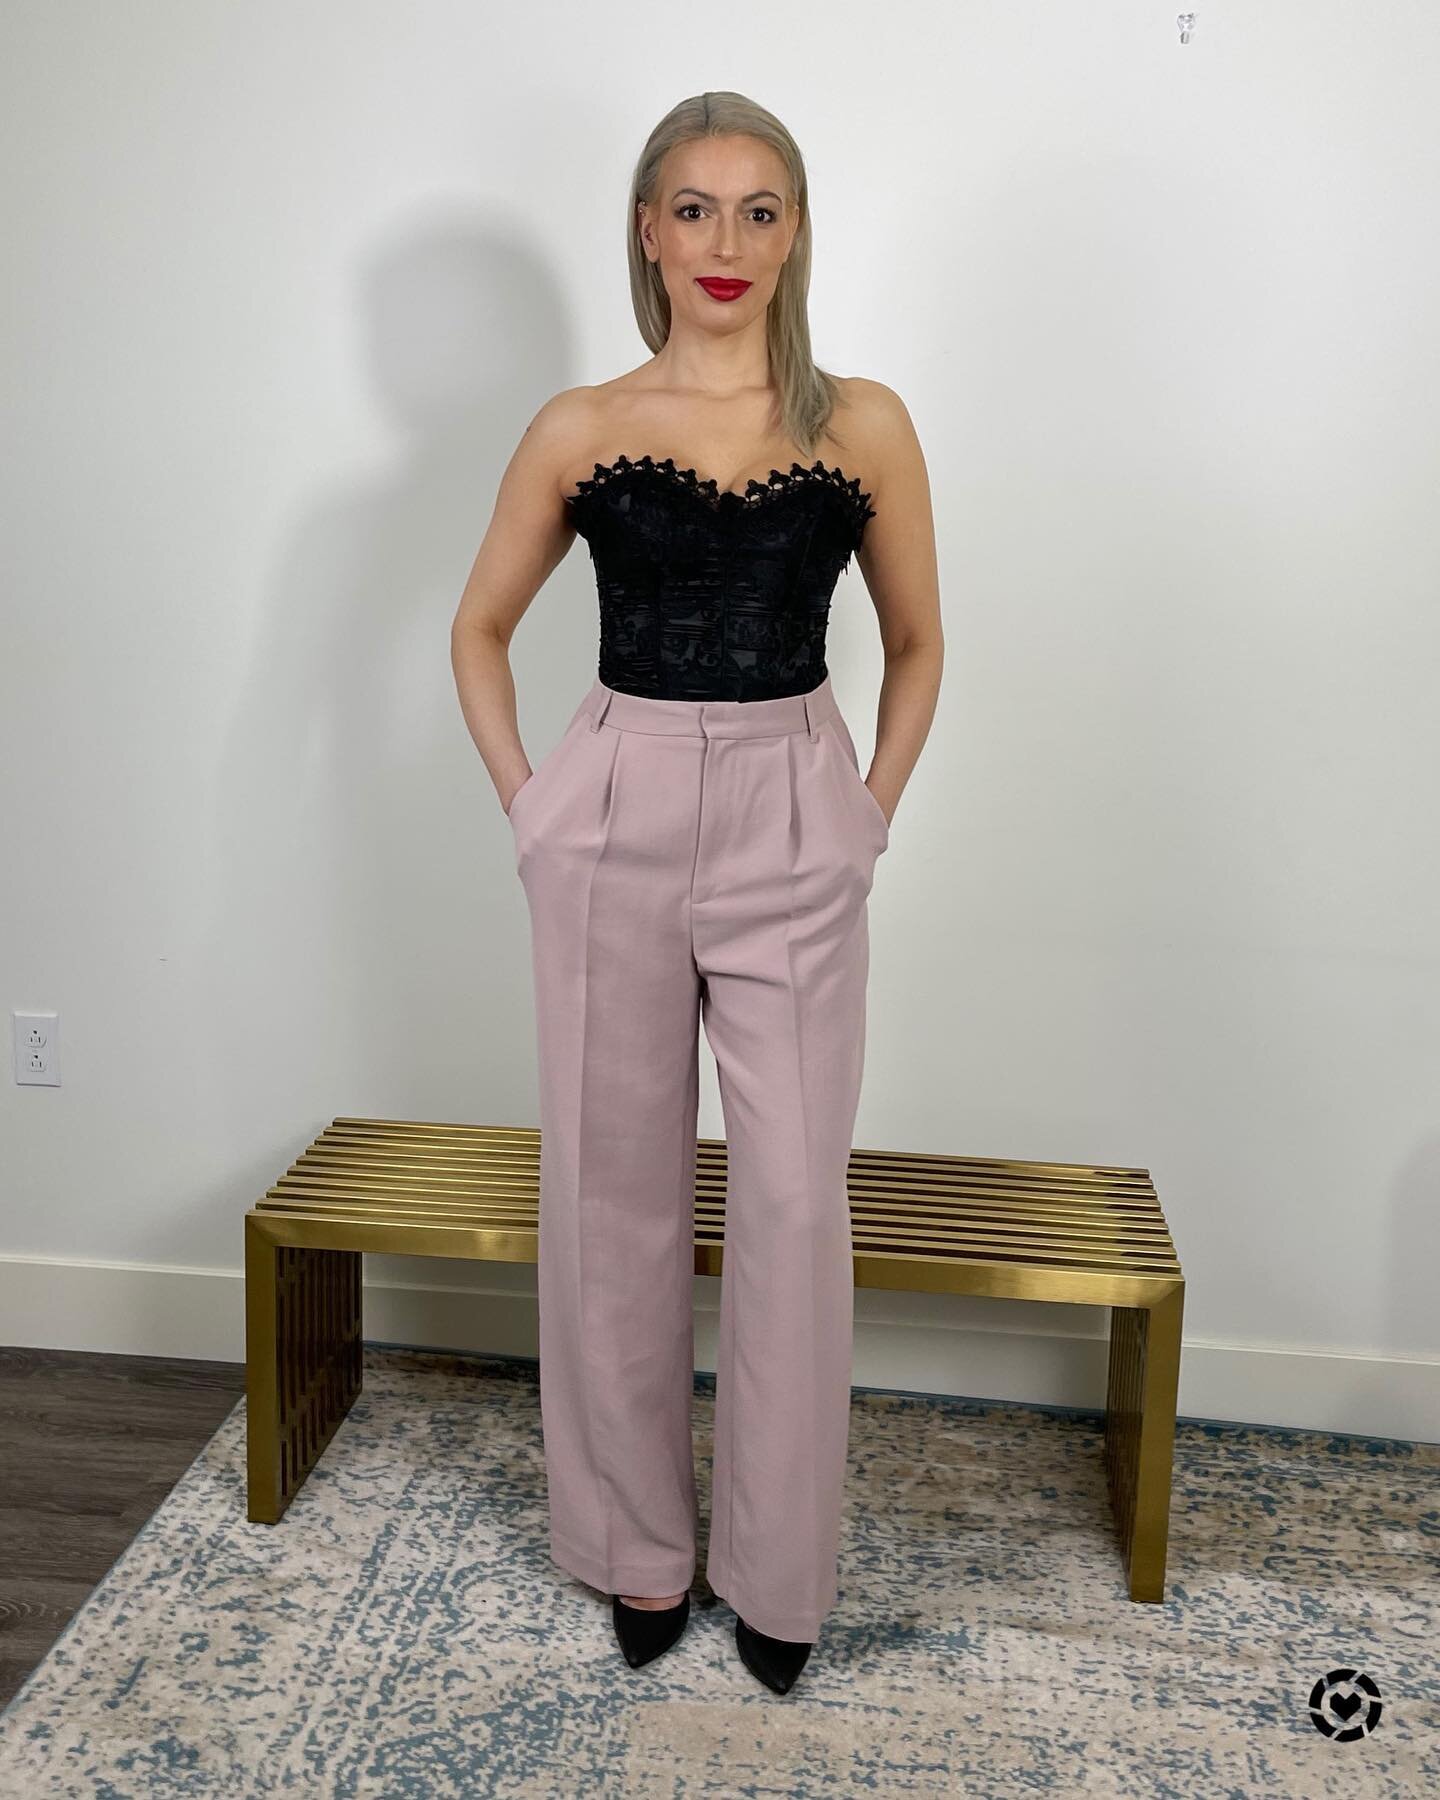 I love a good power suit and this one from @zara is stunning. I paired it with a sexy corset from @fredericks_hollywood and pumps from @amazon to give it a feminine touch. And I love the &ldquo;don&rsquo;t mess with me&rdquo; look the @blackflyseyewe